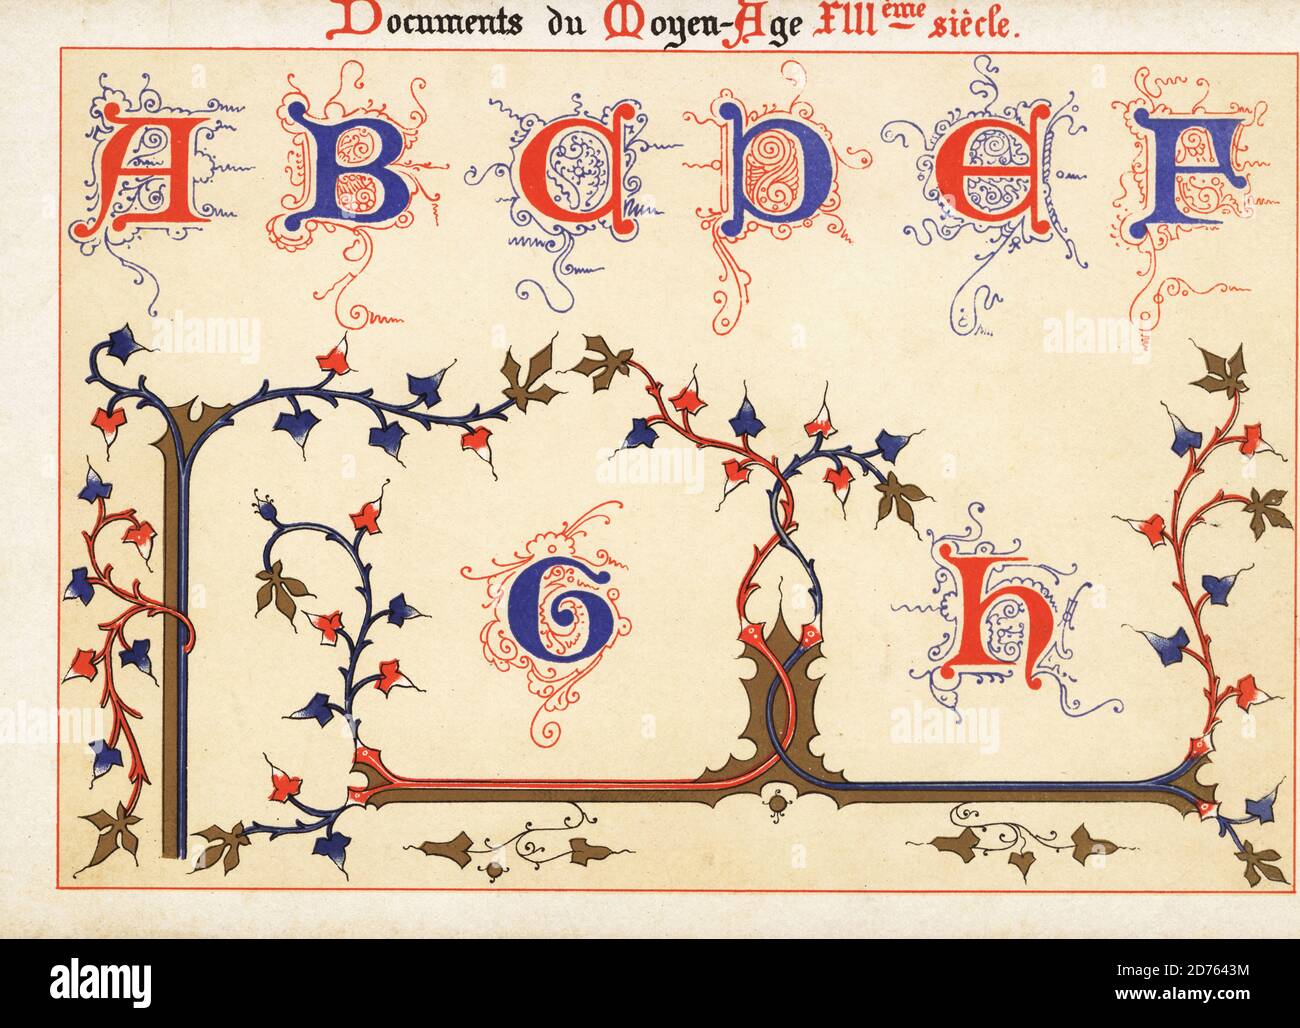 Alphabet of decorative initial letters from A to H, with filigree and foliage, from a 13th century illuminated Latin psalter in the Bibliotheque National, manuscript 10435. Tire du Psautier Latin No. 10435, Bib. Nat. Chromolithograph designed and lithographed by Ernst Guillot from his Ornementation des Manuscrits au Moyen-Age (Ornamentation from Manuscripts of the Middle Ages), Paris, 1897. Stock Photo